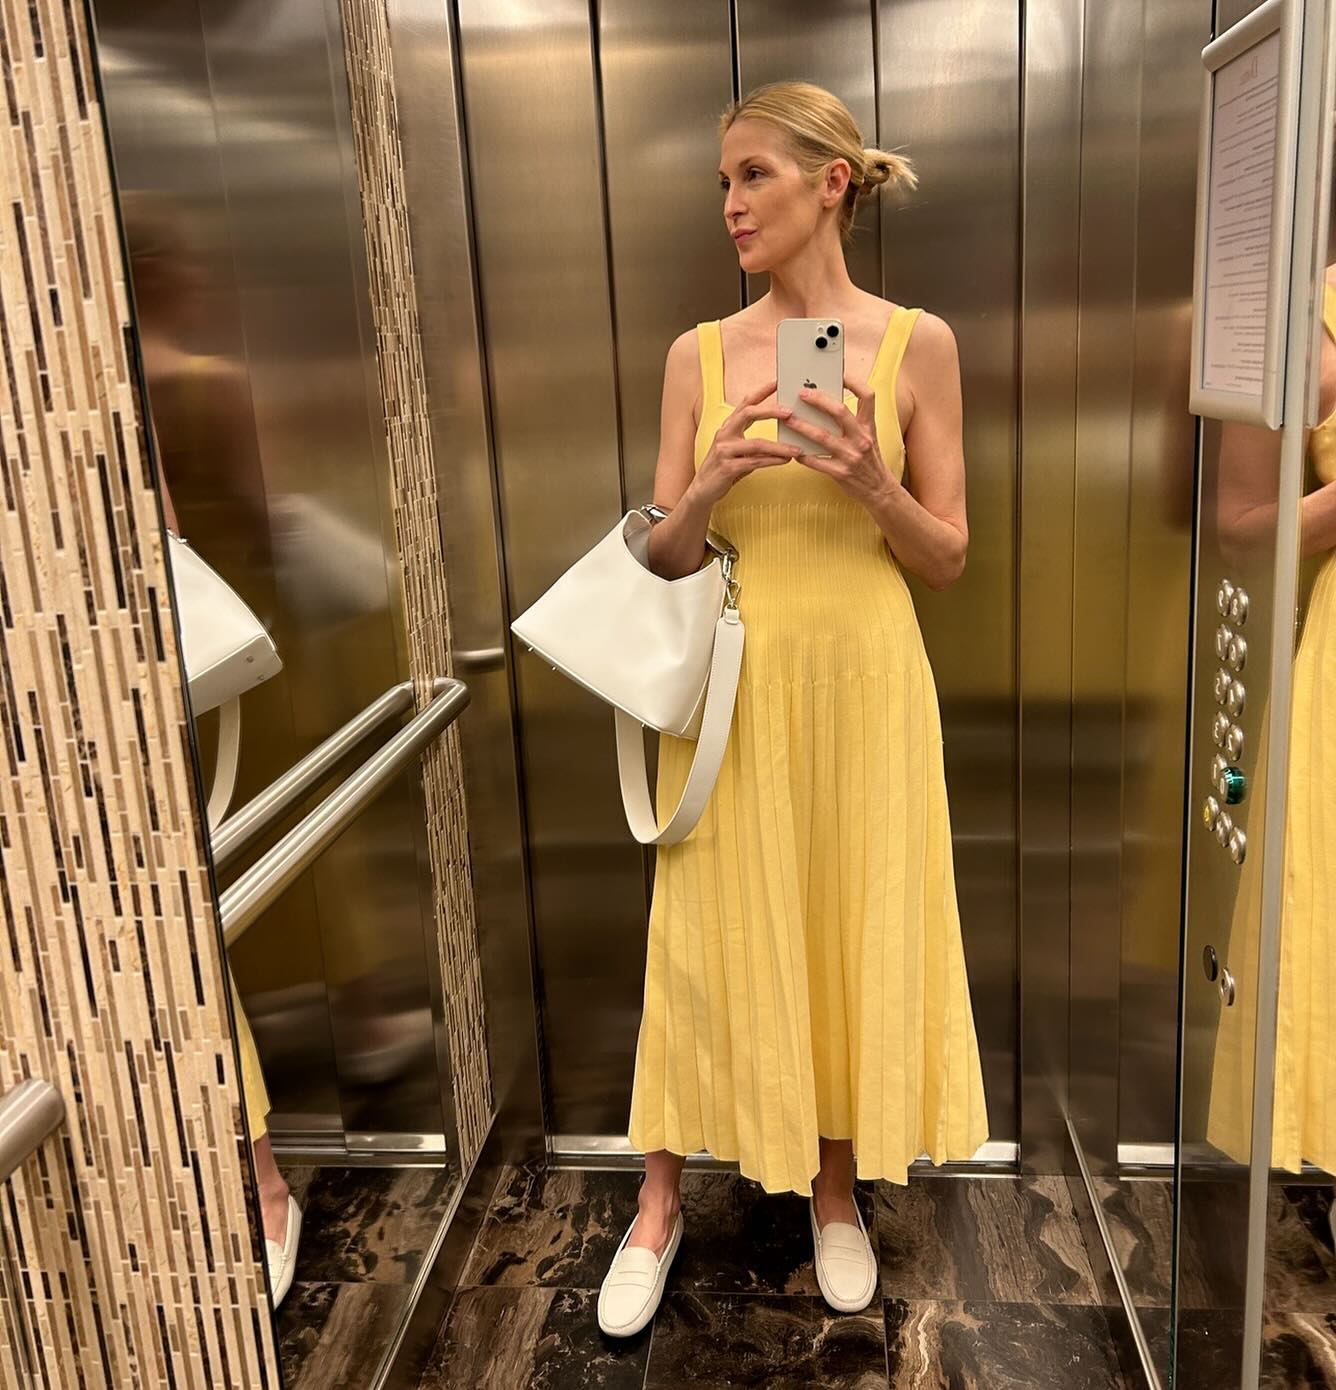 Woman in elevator wears yellow dress, white shoes and white bag